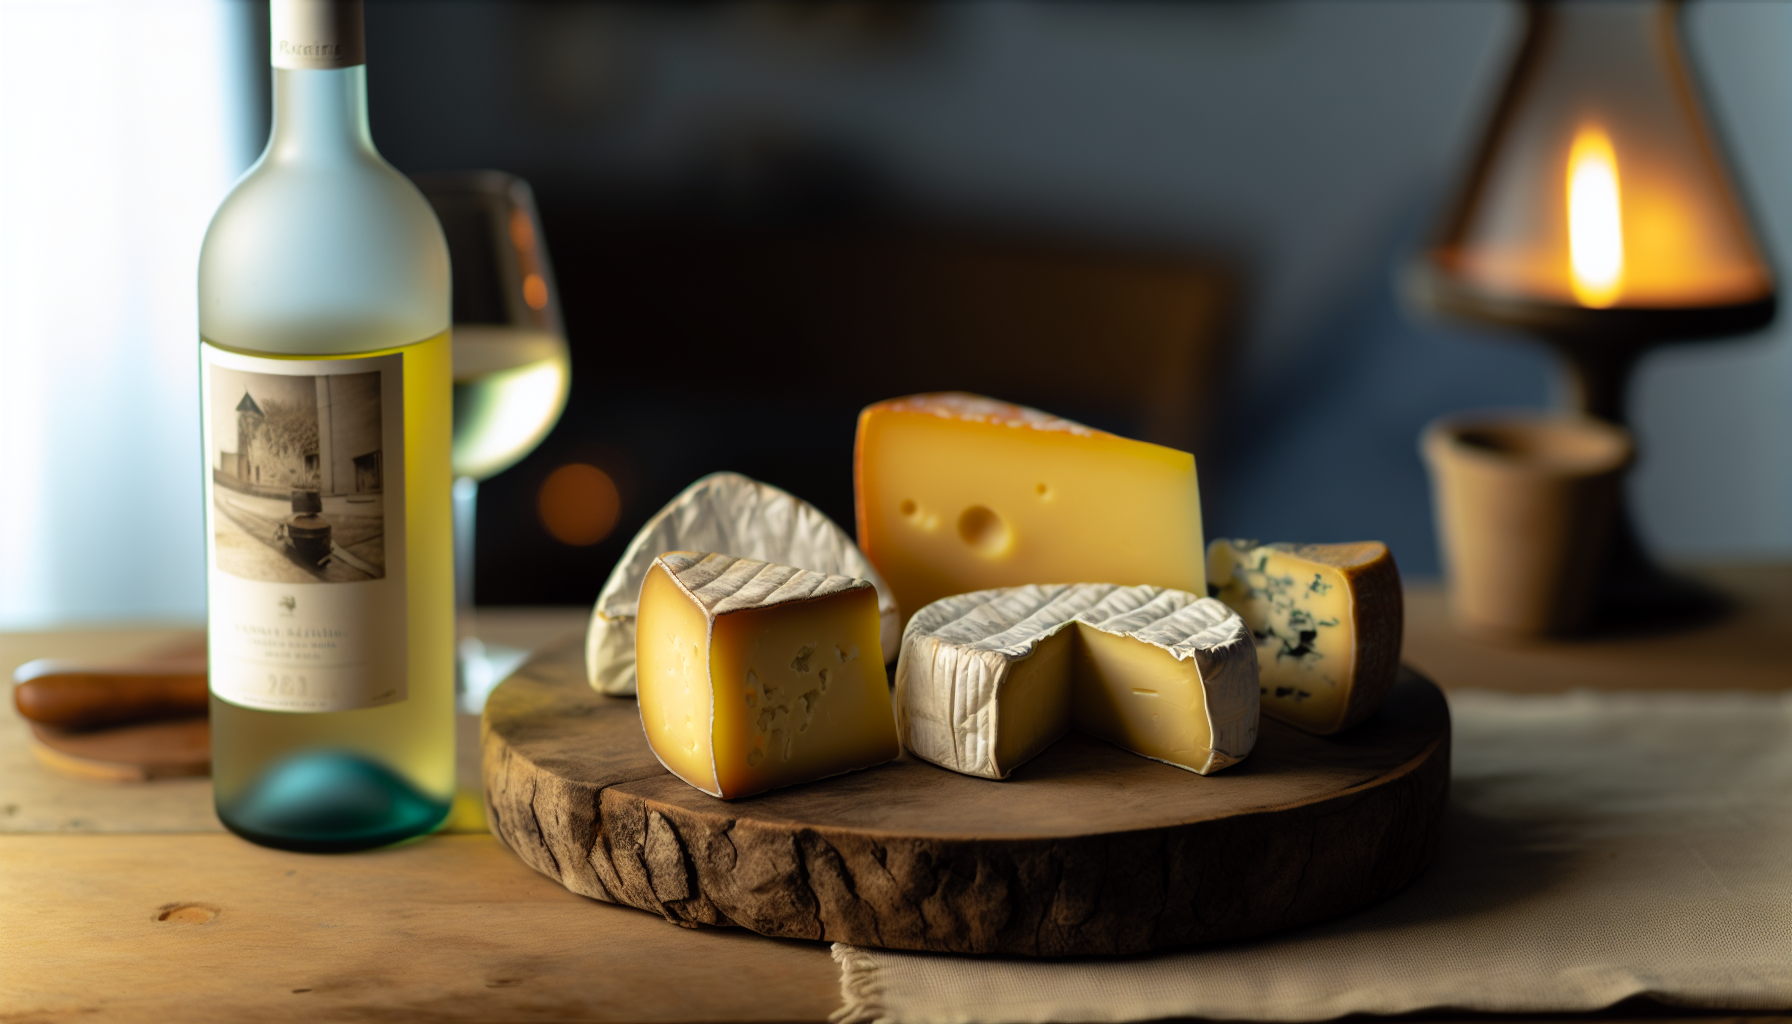 Assortment of gourmet cheeses with a bottle of white wine